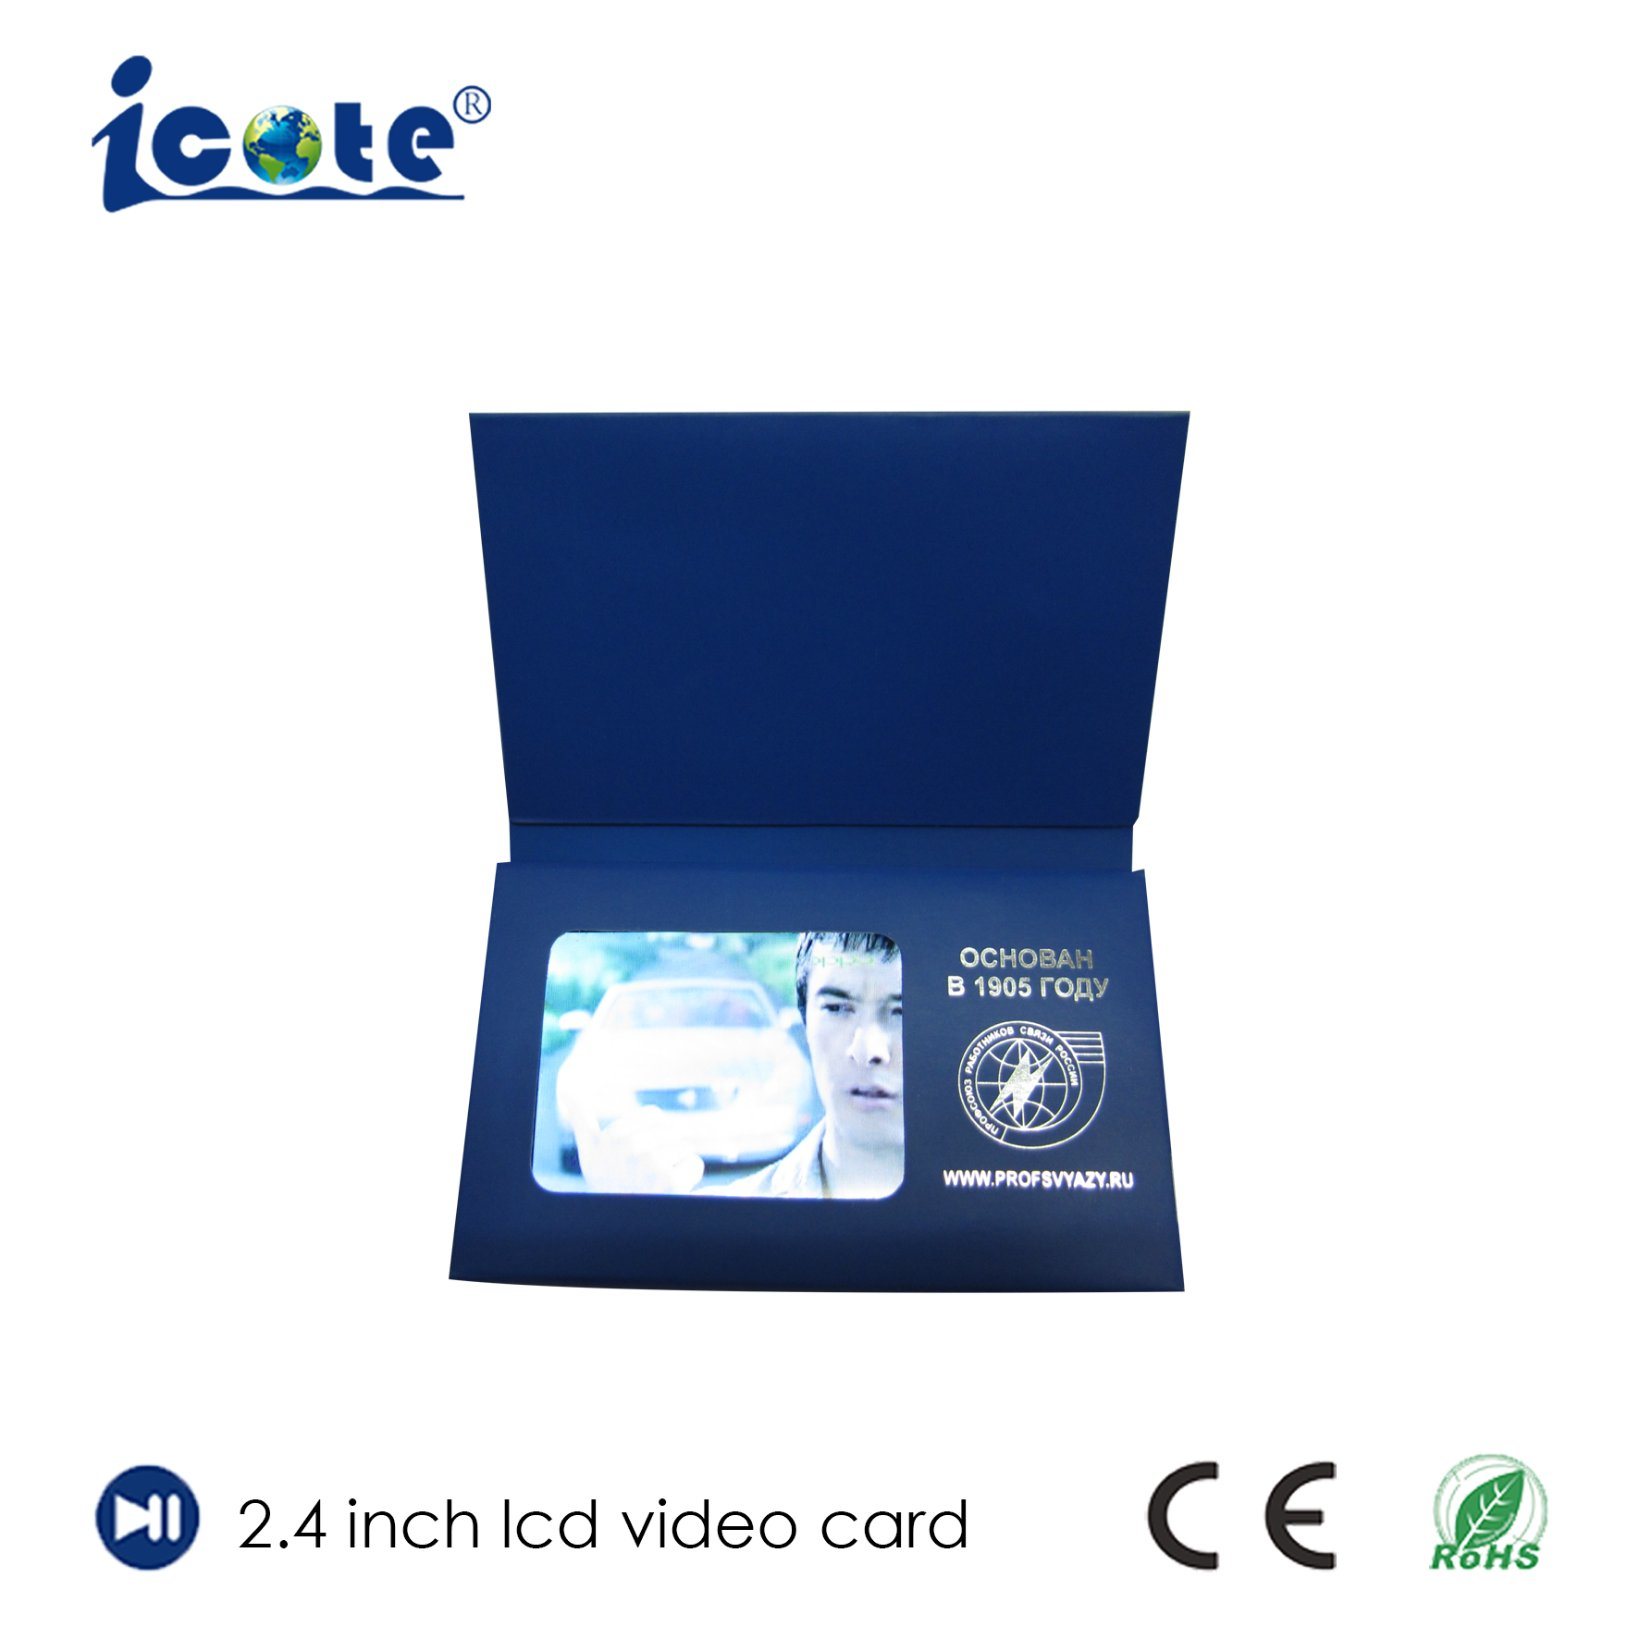 2.4 Inch LCD Screen Business Advertising Promotion Video Card